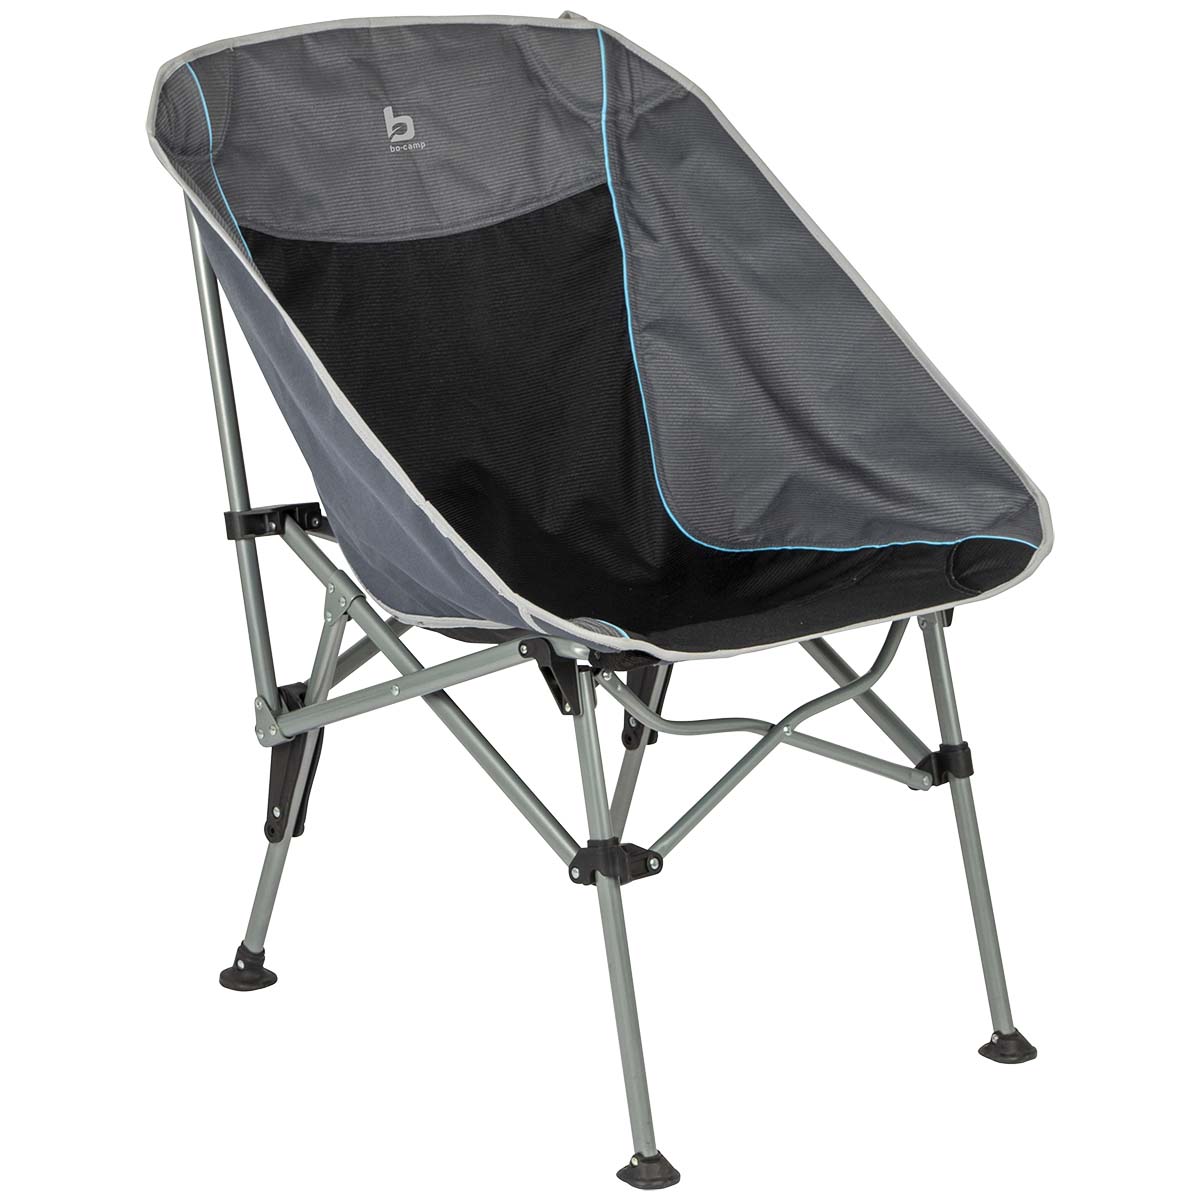 1204749 A very compact and luxury folding chair. This bucket seat is very compact to fold and transport in the included carrying bag. The chair has a steel frame with a luxurious 2-tone 600D polyester upholstery.